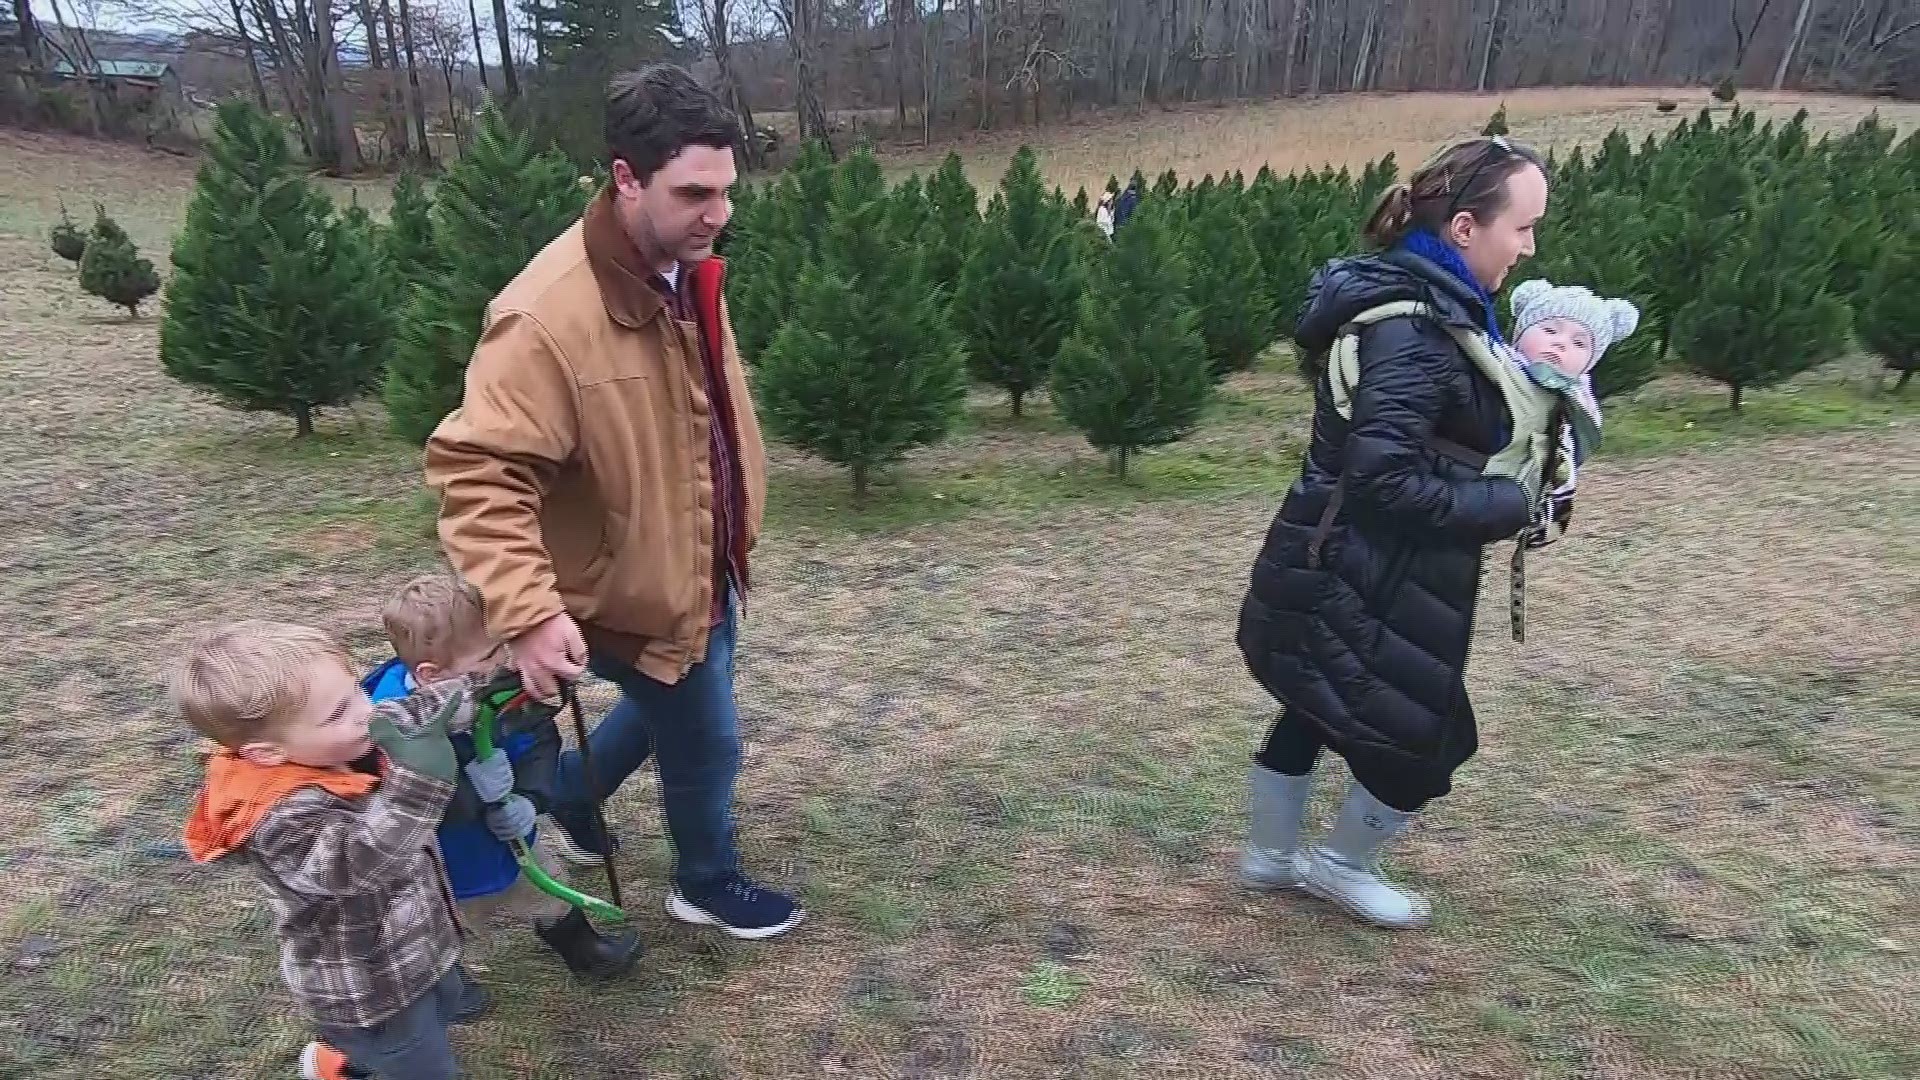 REPORTER GRACE KING TAKES US TO ONE TREE FARM IN ANDERSON COUNTY WHERE MOST TREES HAVE ALREADY BEEN CUT DOWN.